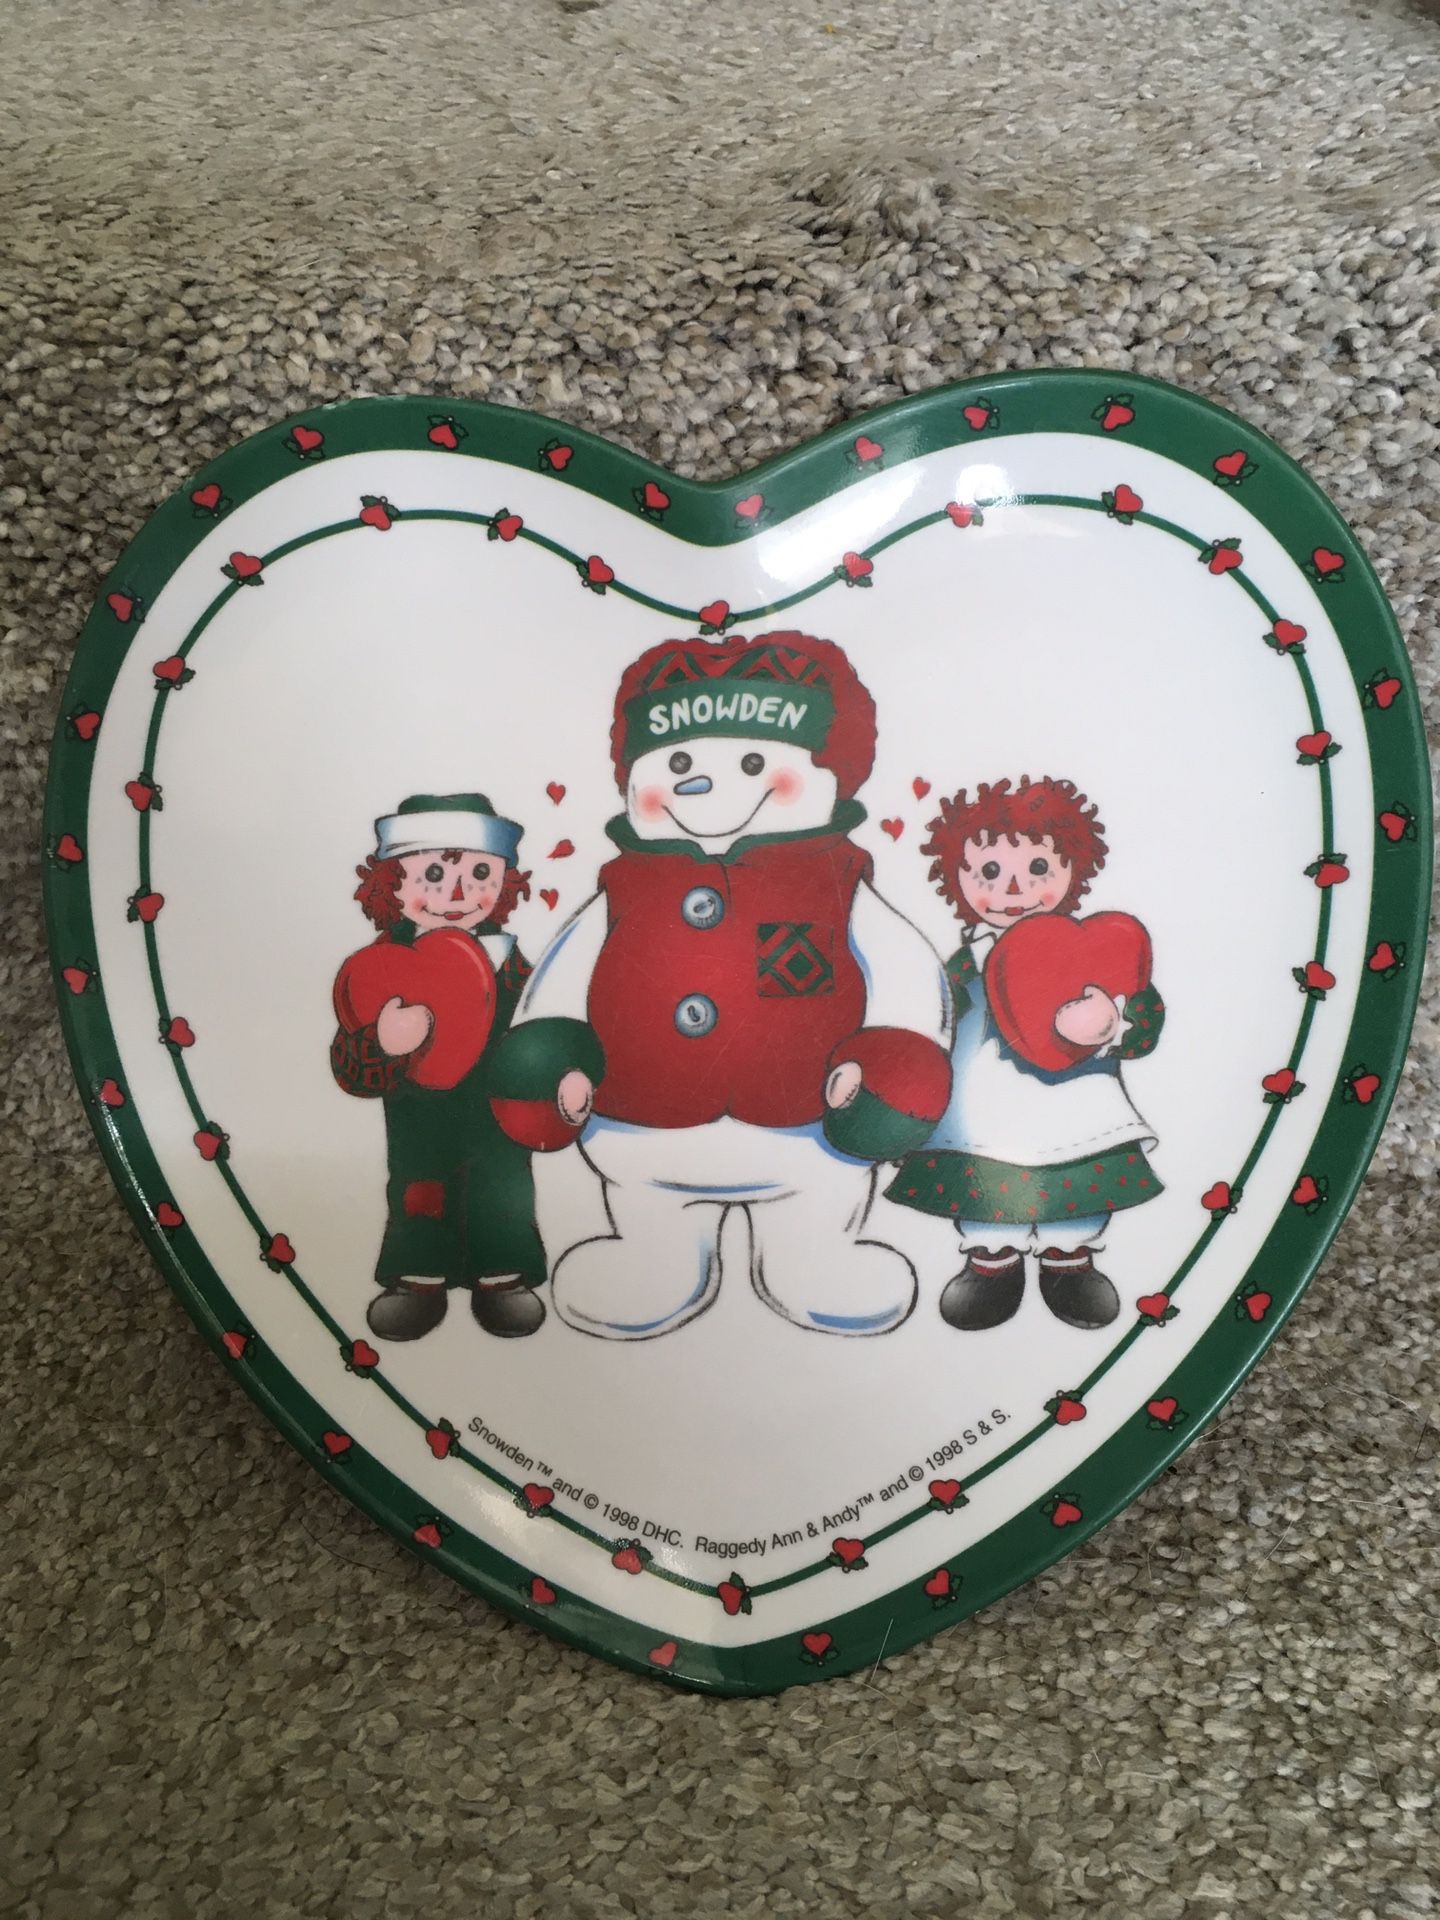 Vintage 1998 Snowden Raggedy Ann & Andy Heart Shaped plastic Plate